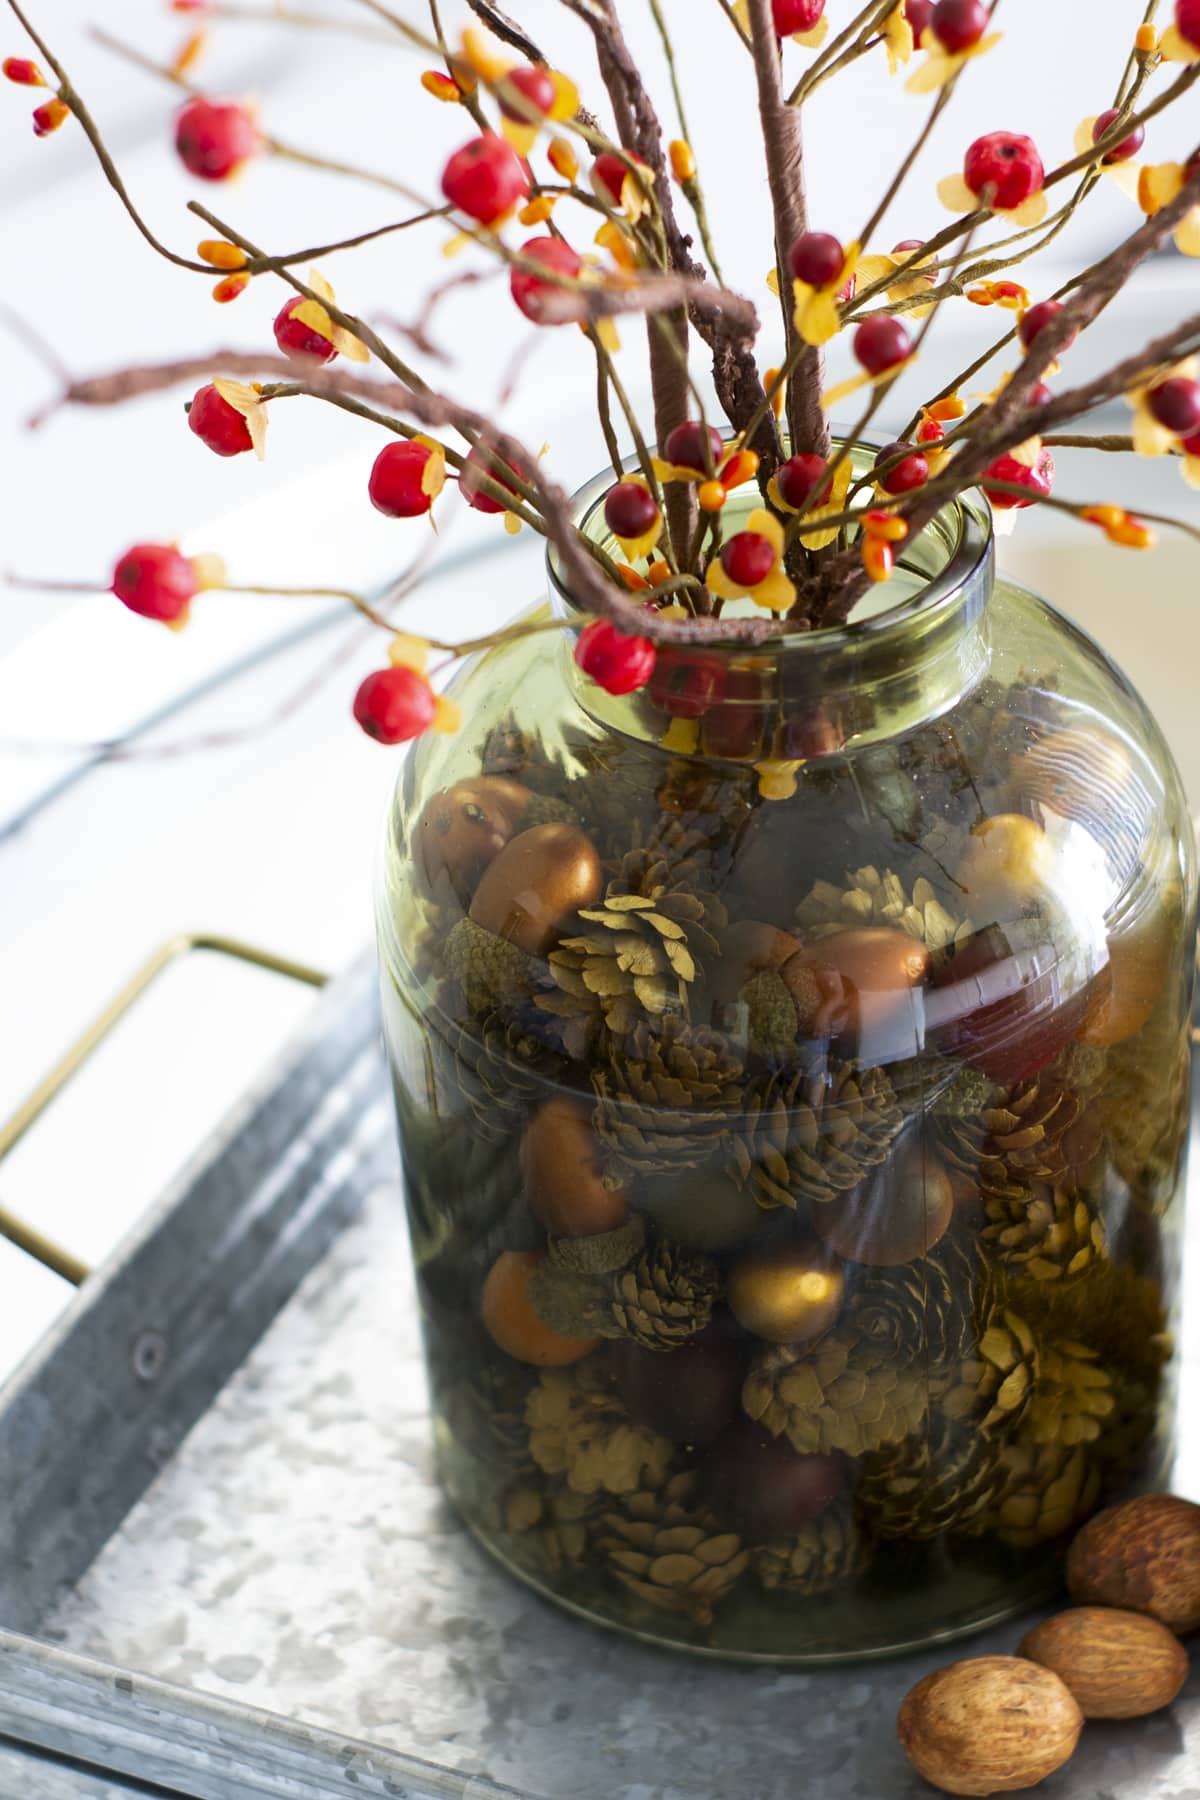 green jar vase with pine cones and acorns inside and arranged with bittersweet berry sprigs